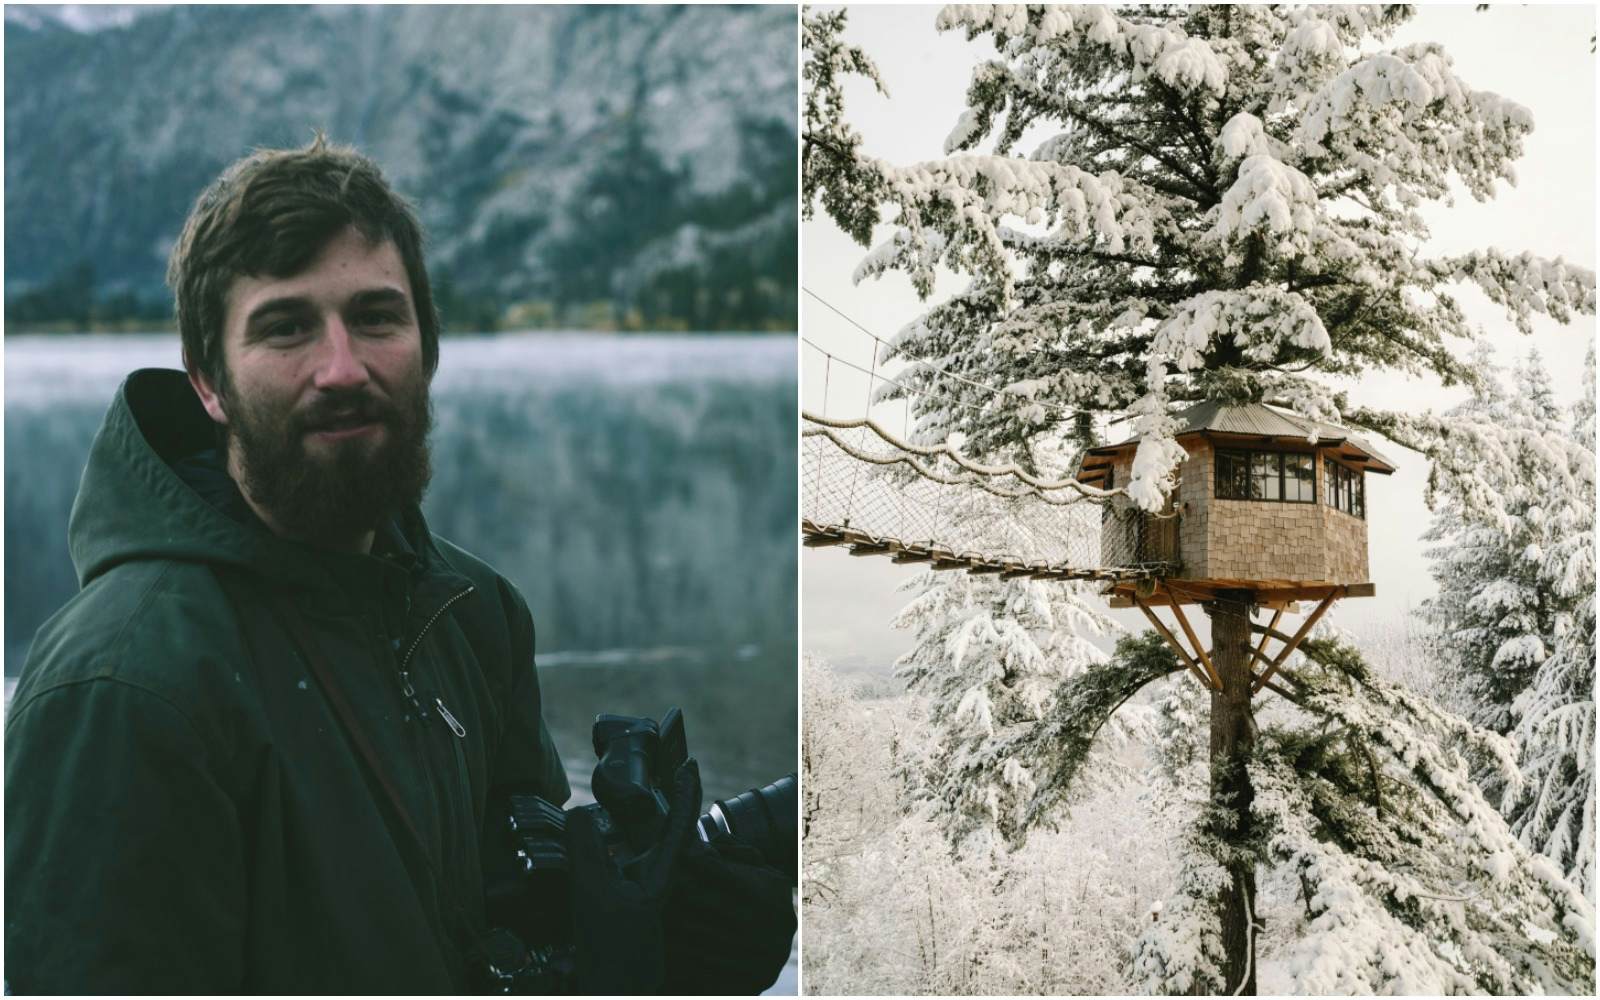 Explore off-grid living with Foster Huntington's new book - Lonely 